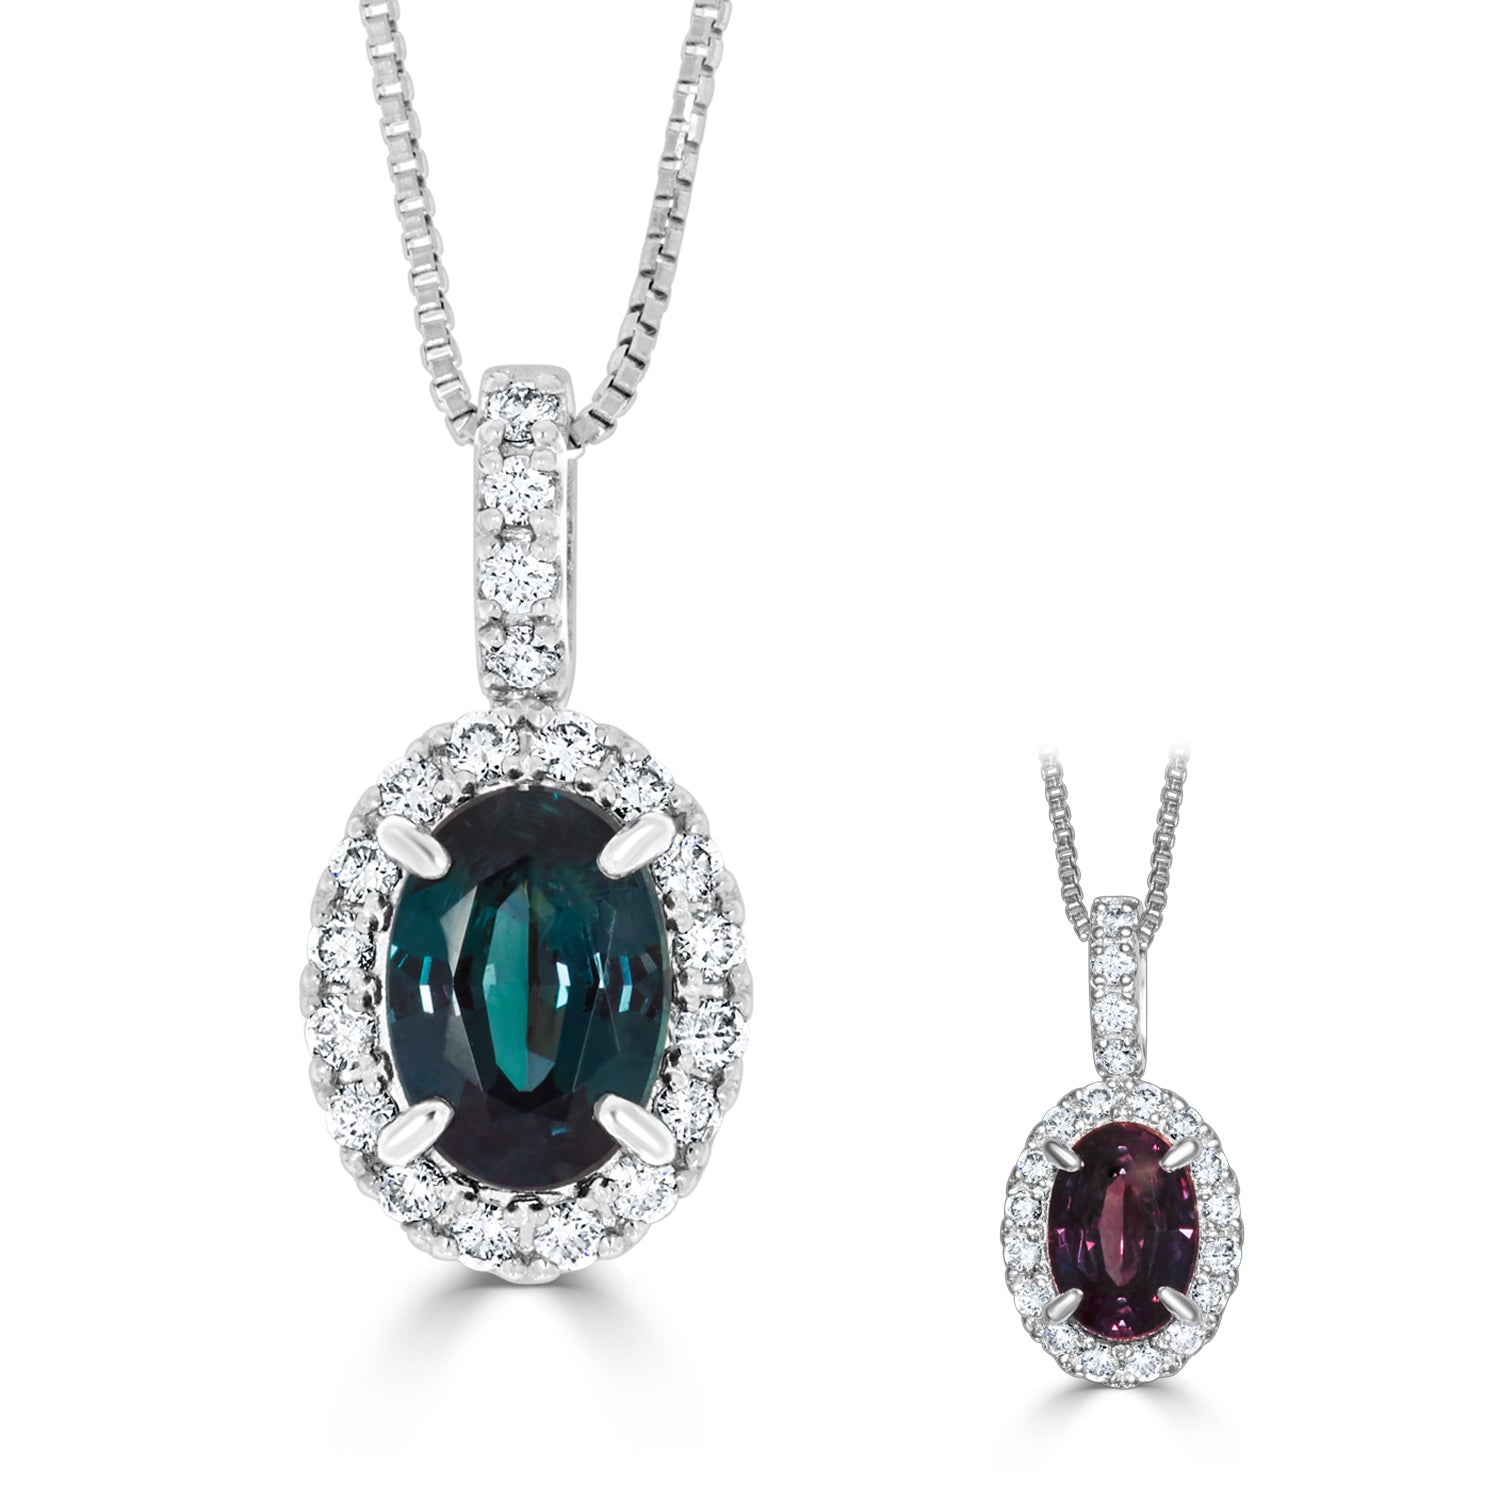 Stunning Natural Alexandrite Gemstone Princess Cut Ruby Pendant Necklace In  925 Sterling Silver And 585 Rose Gold For Women Perfect For Bridal Wear  From Shanye08, $59.8 | DHgate.Com